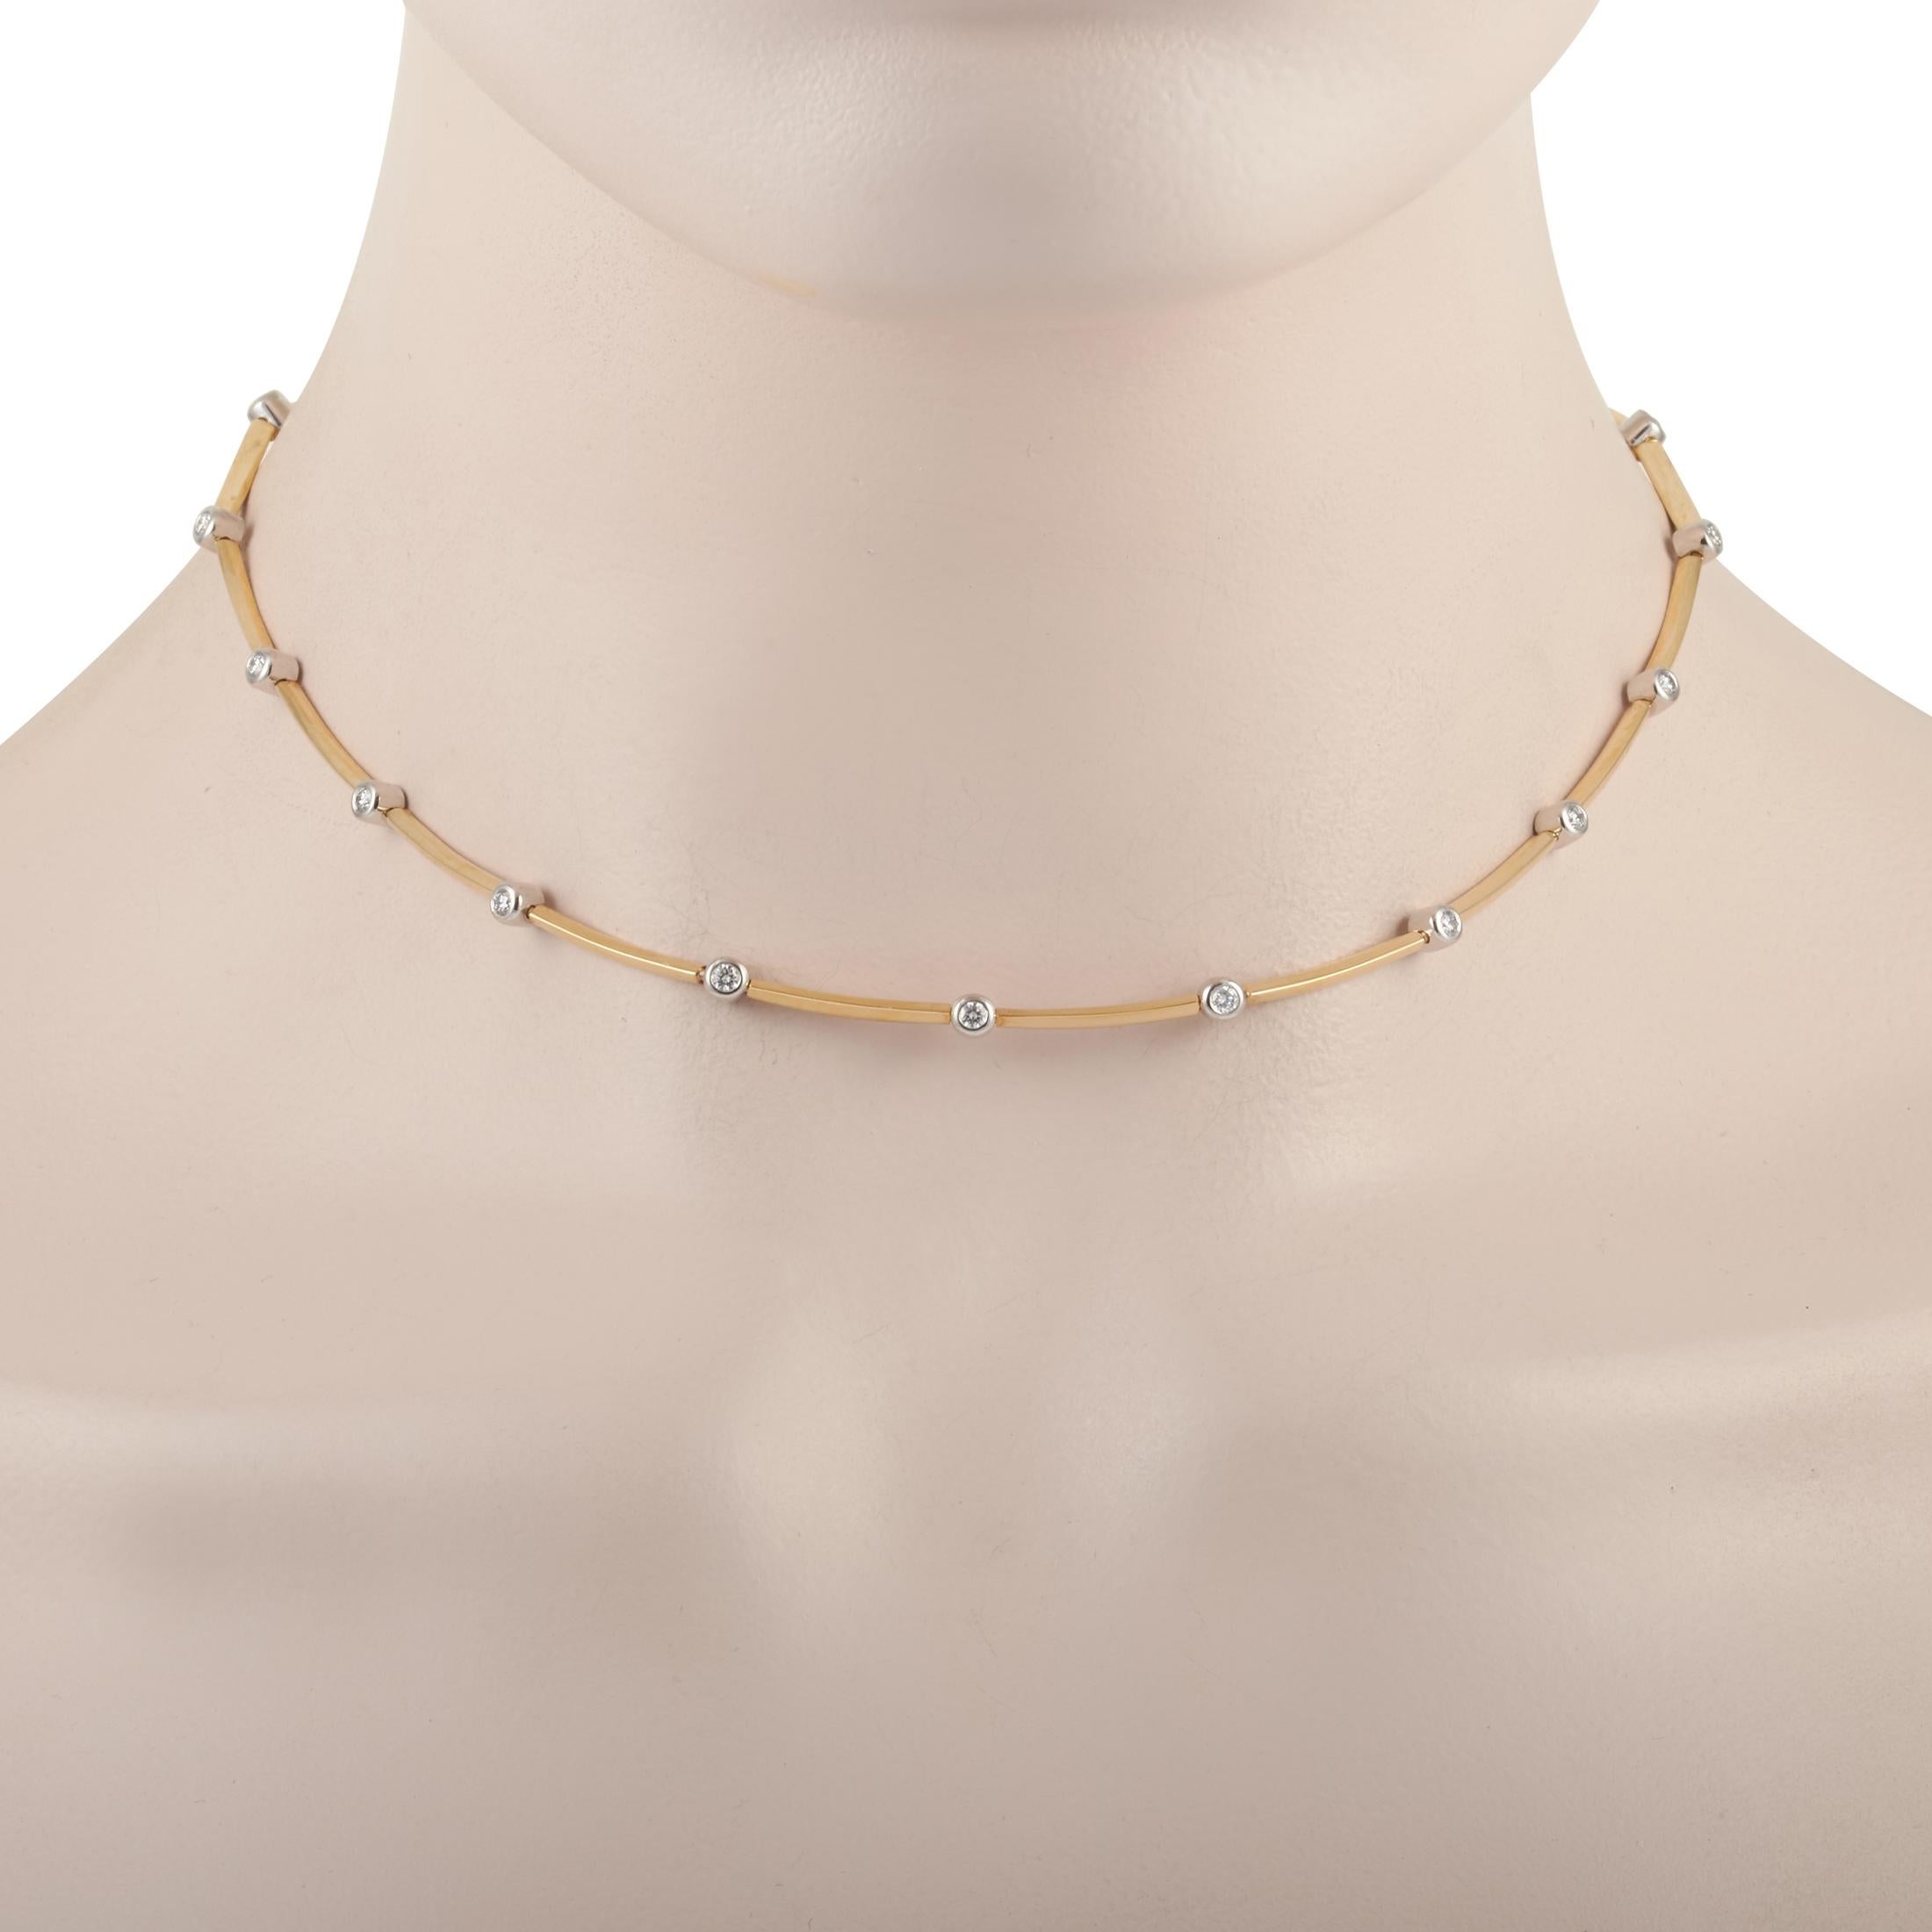 This Tiffany necklace is made from 18K Yellow Gold and embellished in 1.00 carats of diamond that feature E color and VVS clarity. The necklace weighs 22 grams with a length of 15 inches. 
 This piece of jewelry is exceptional and comes complete